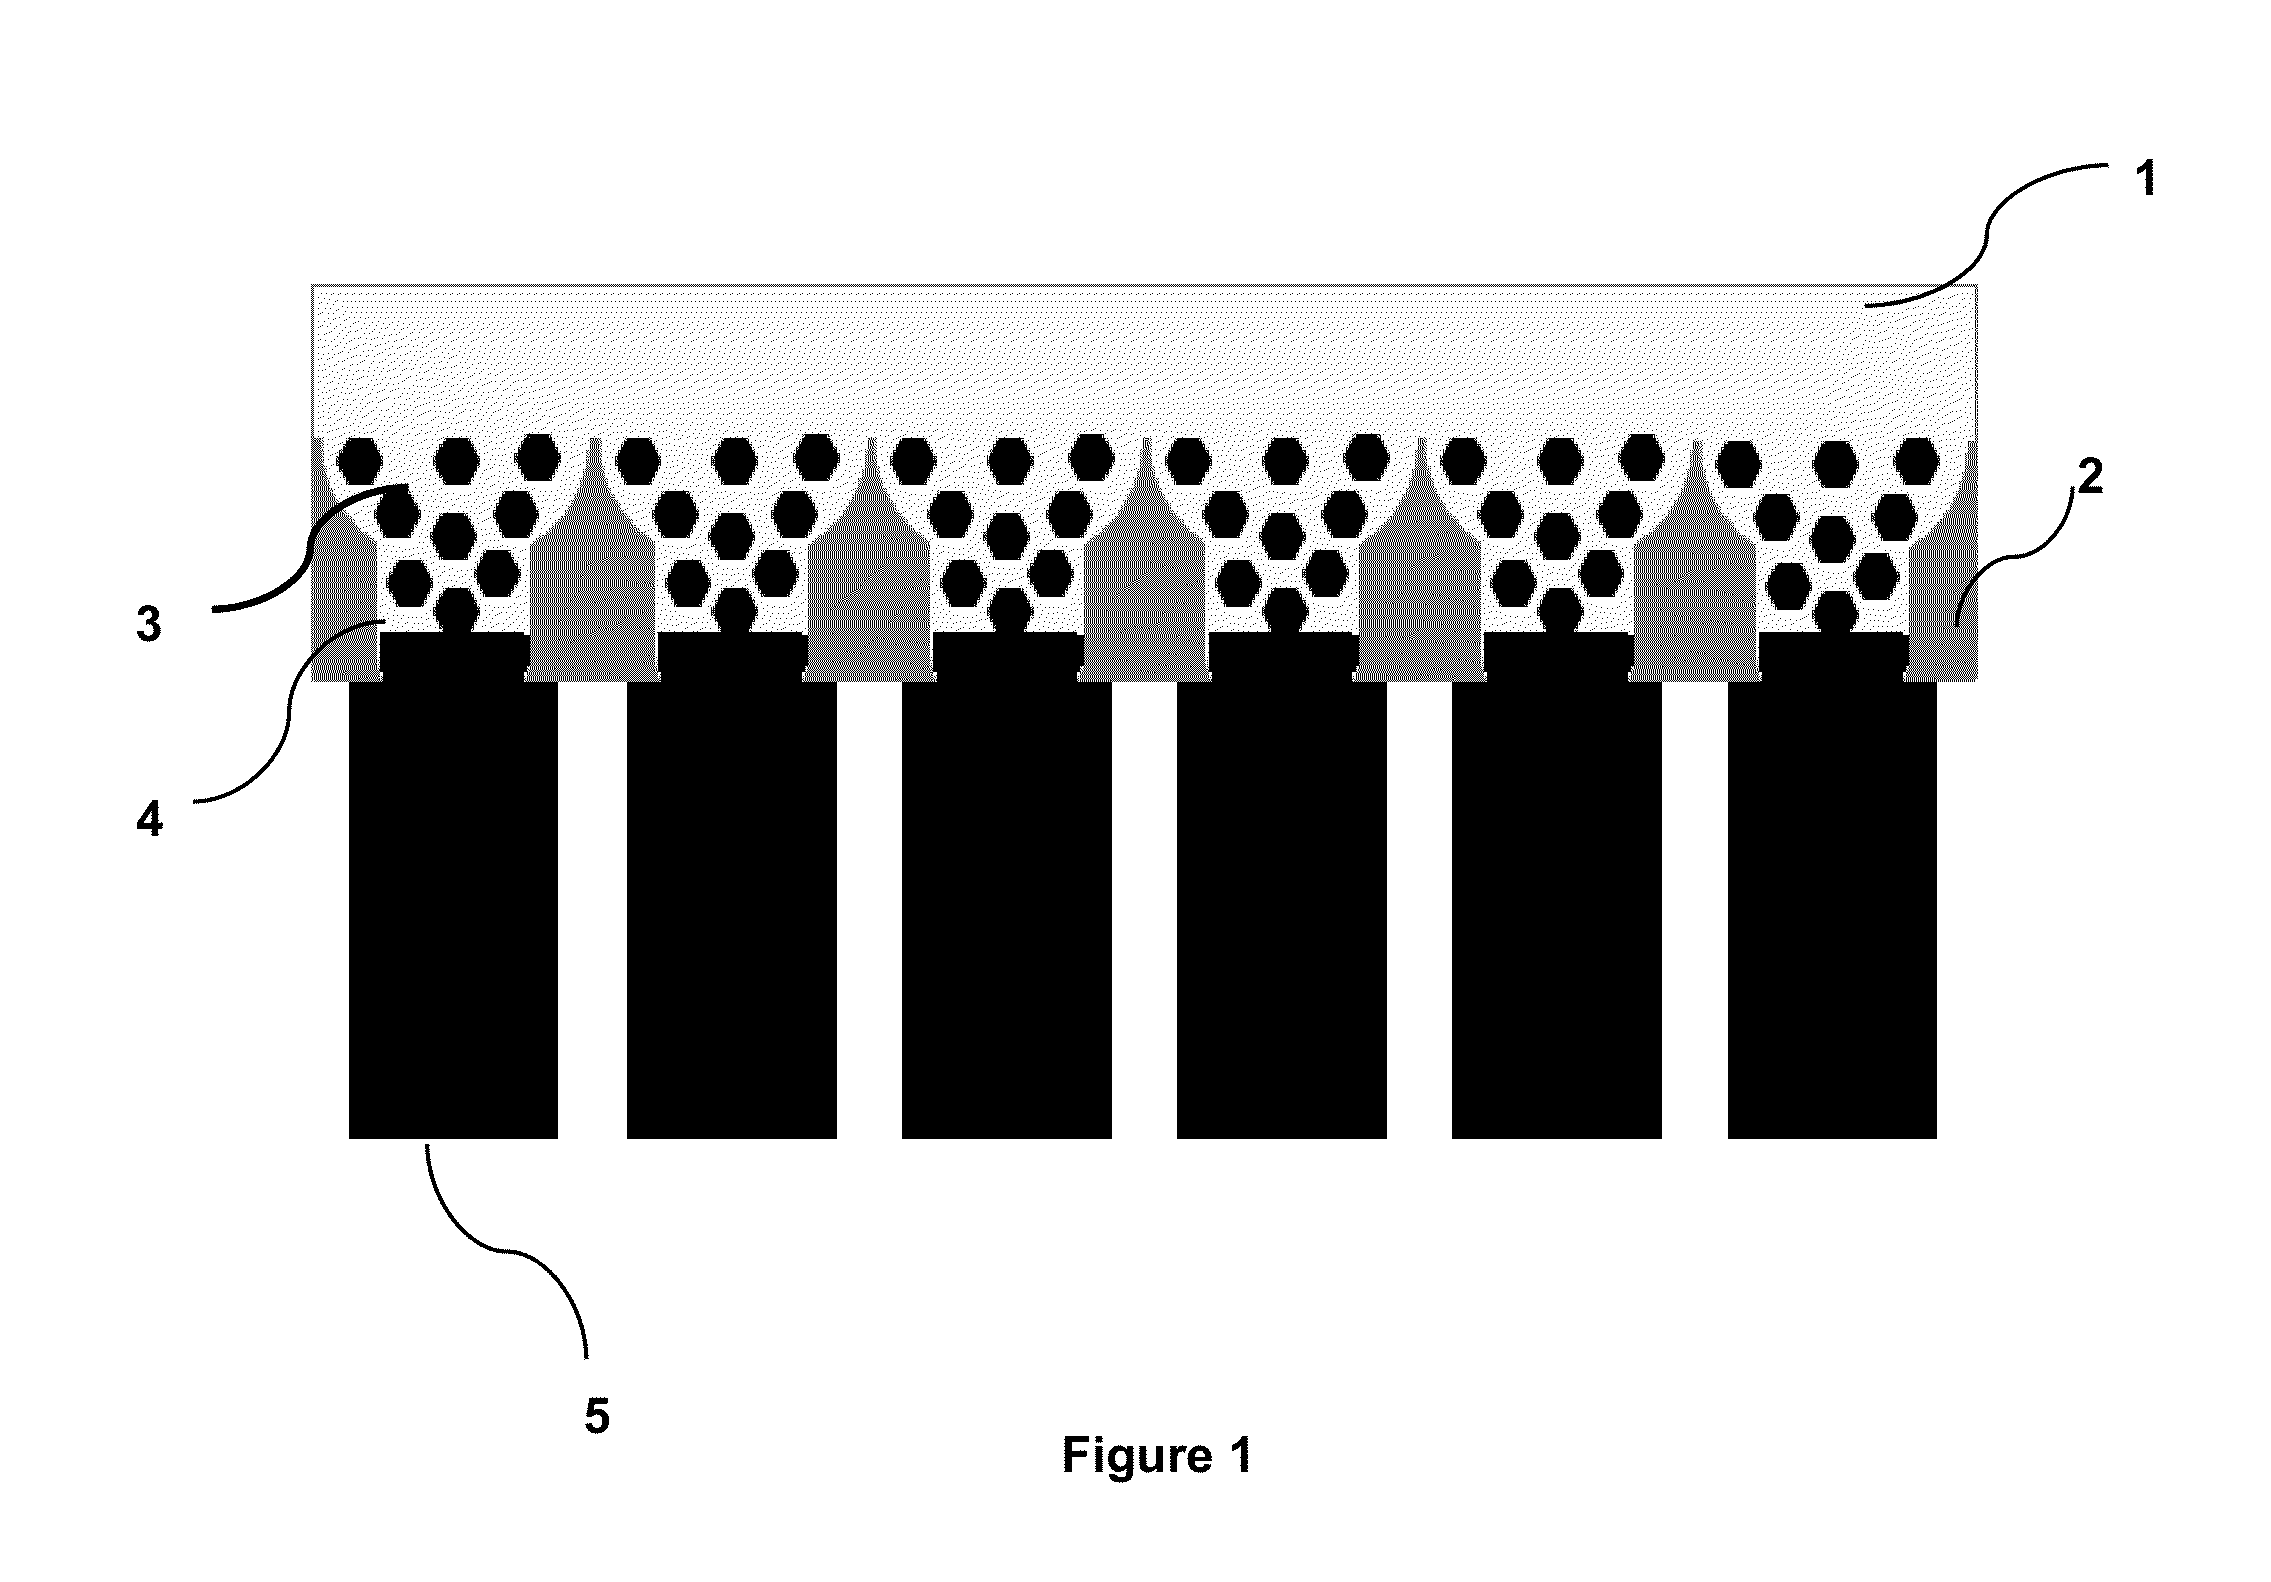 Anodized aluminum oxide template enabled nanostructure formation and method thereof